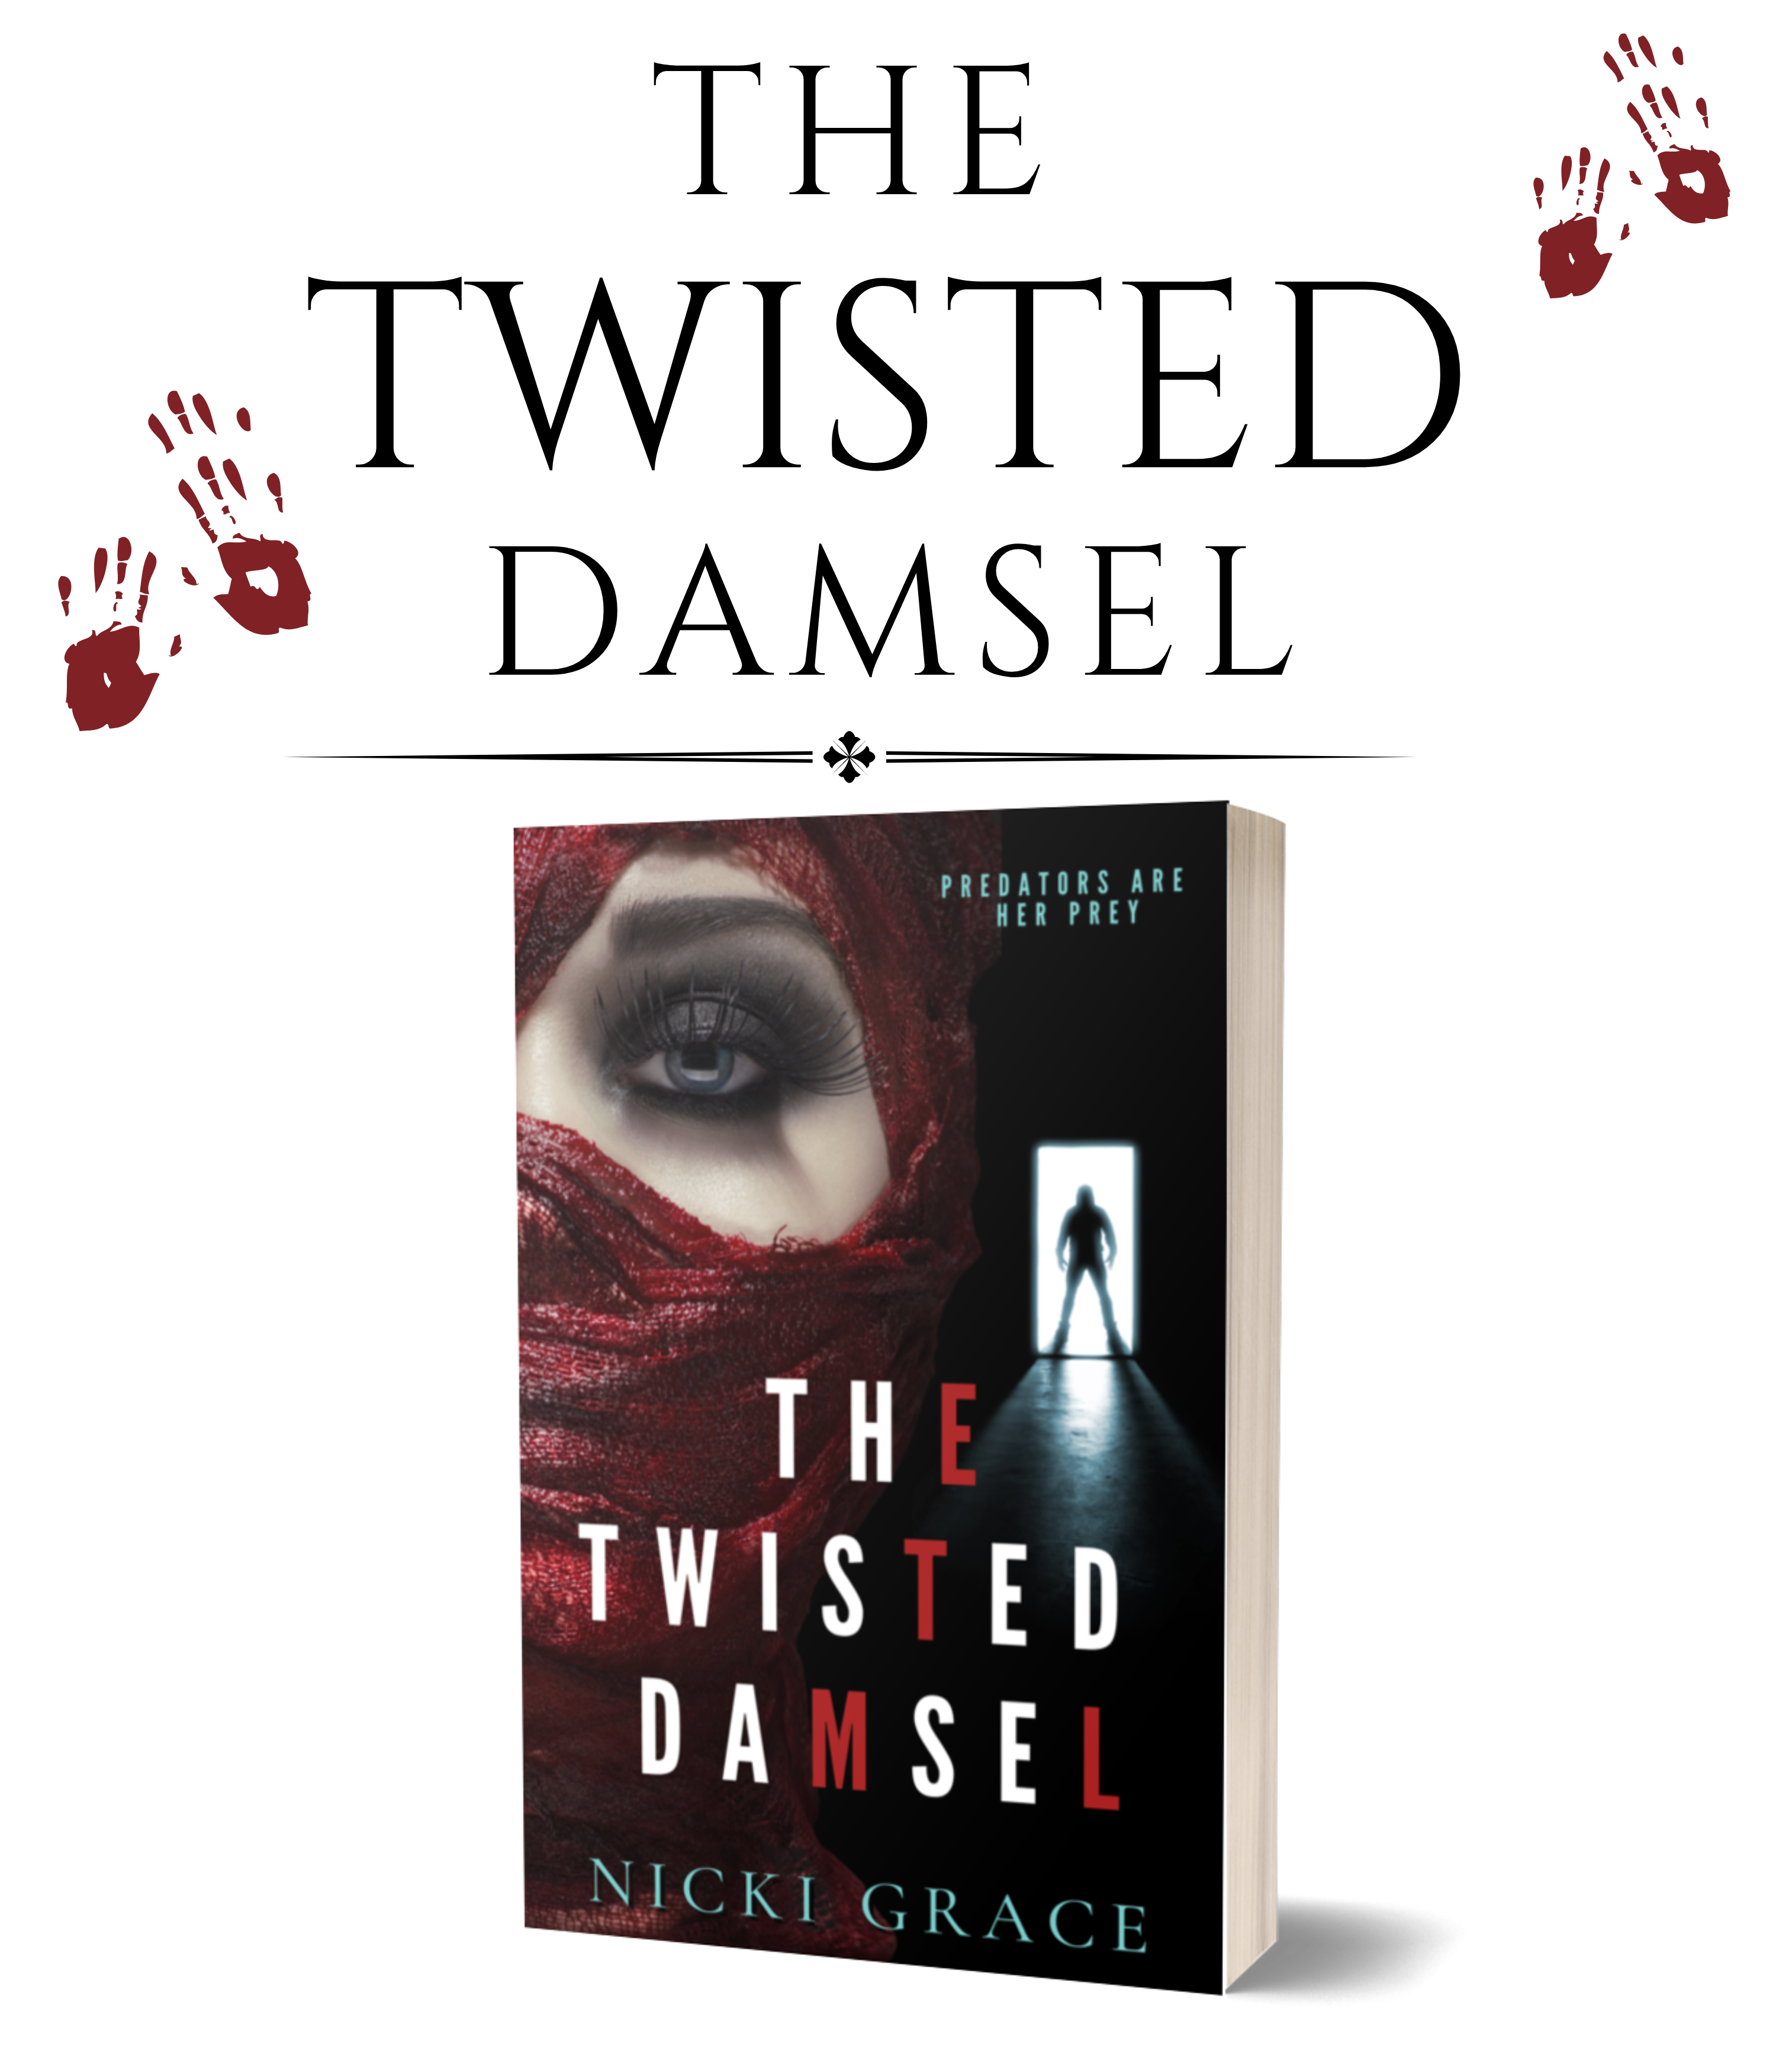 The Twisted Damsel